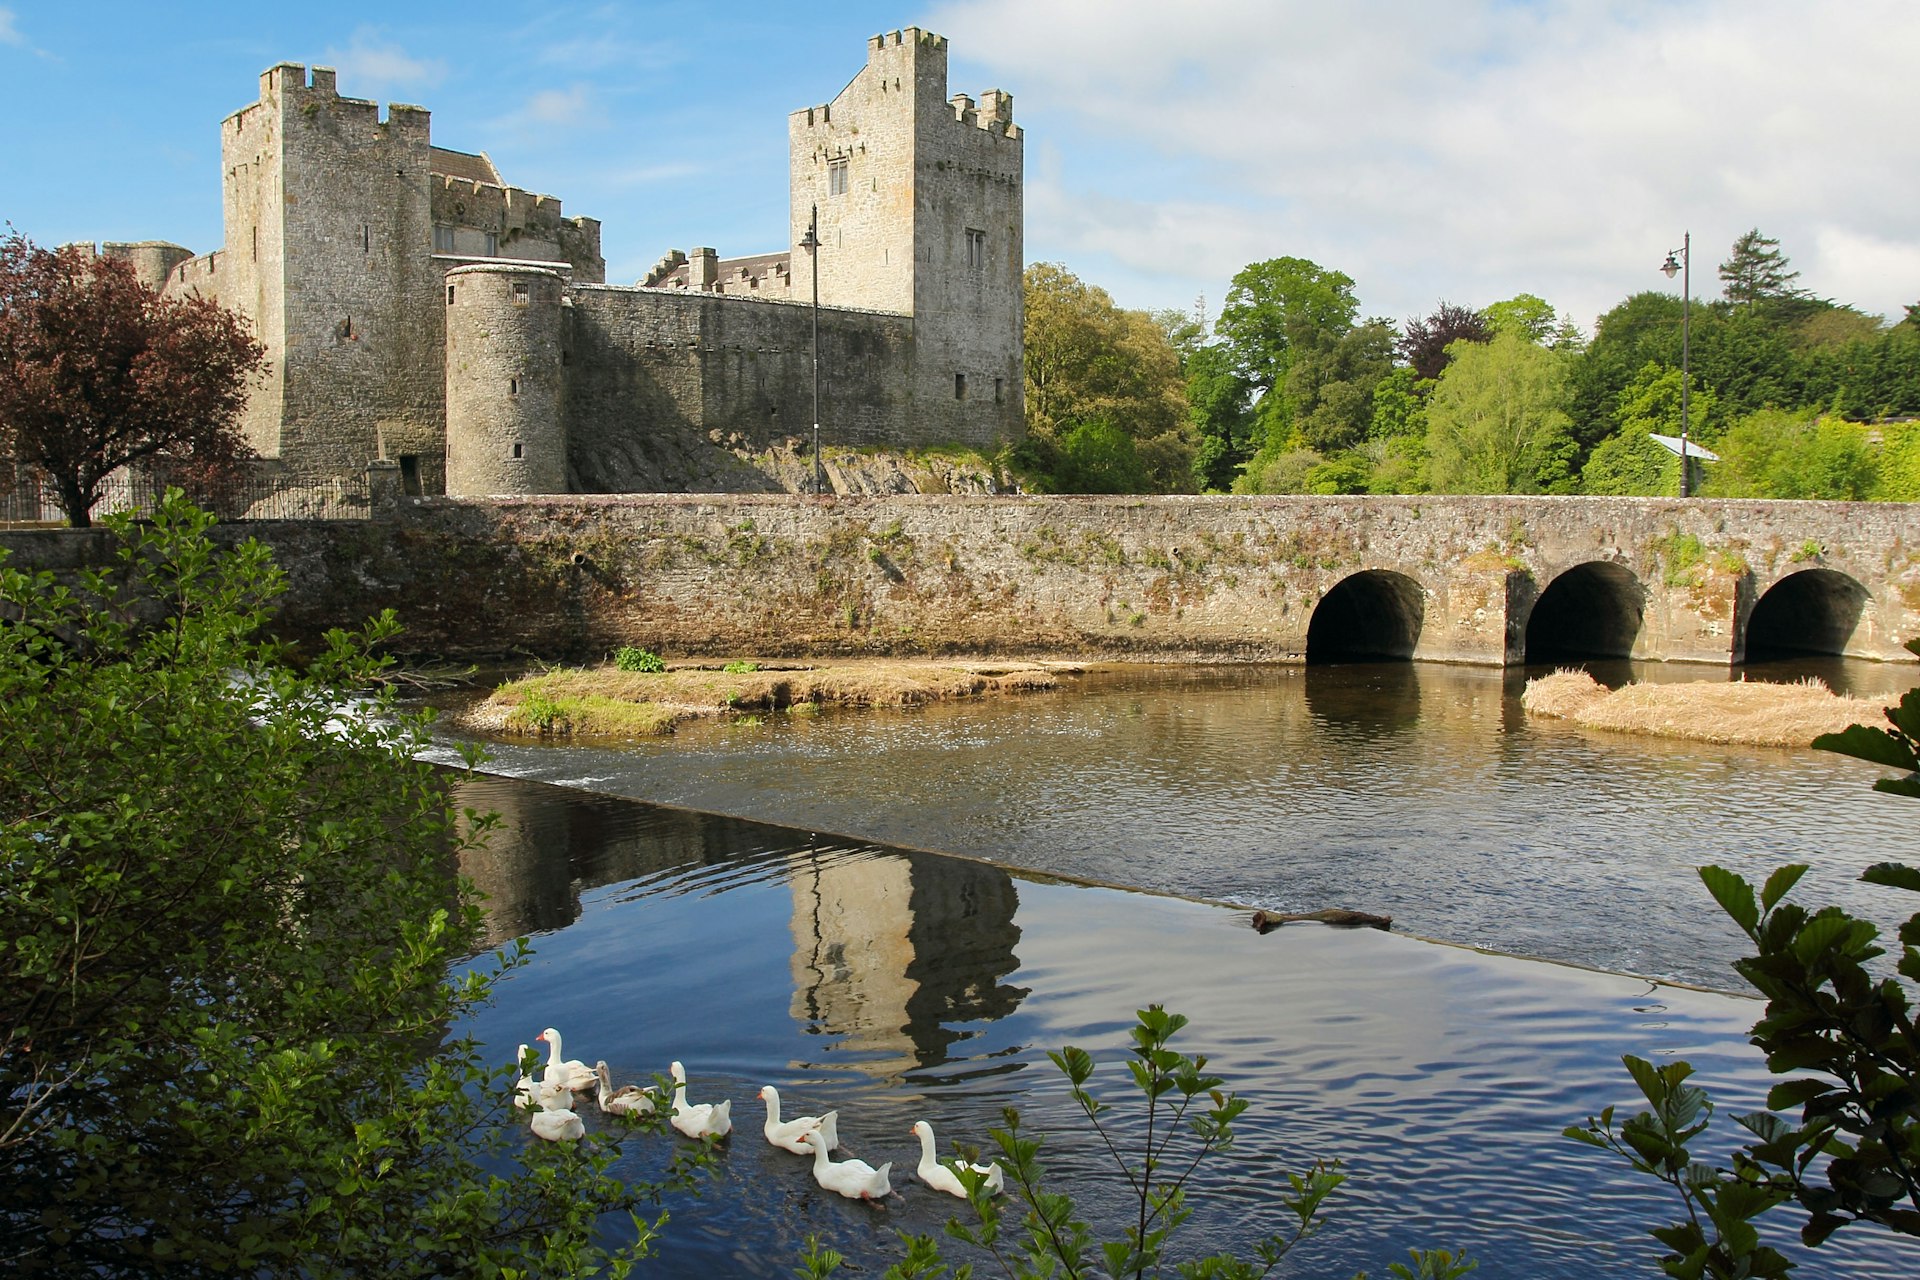 The exterior of Cahir Castle in Tipperary, Ireland